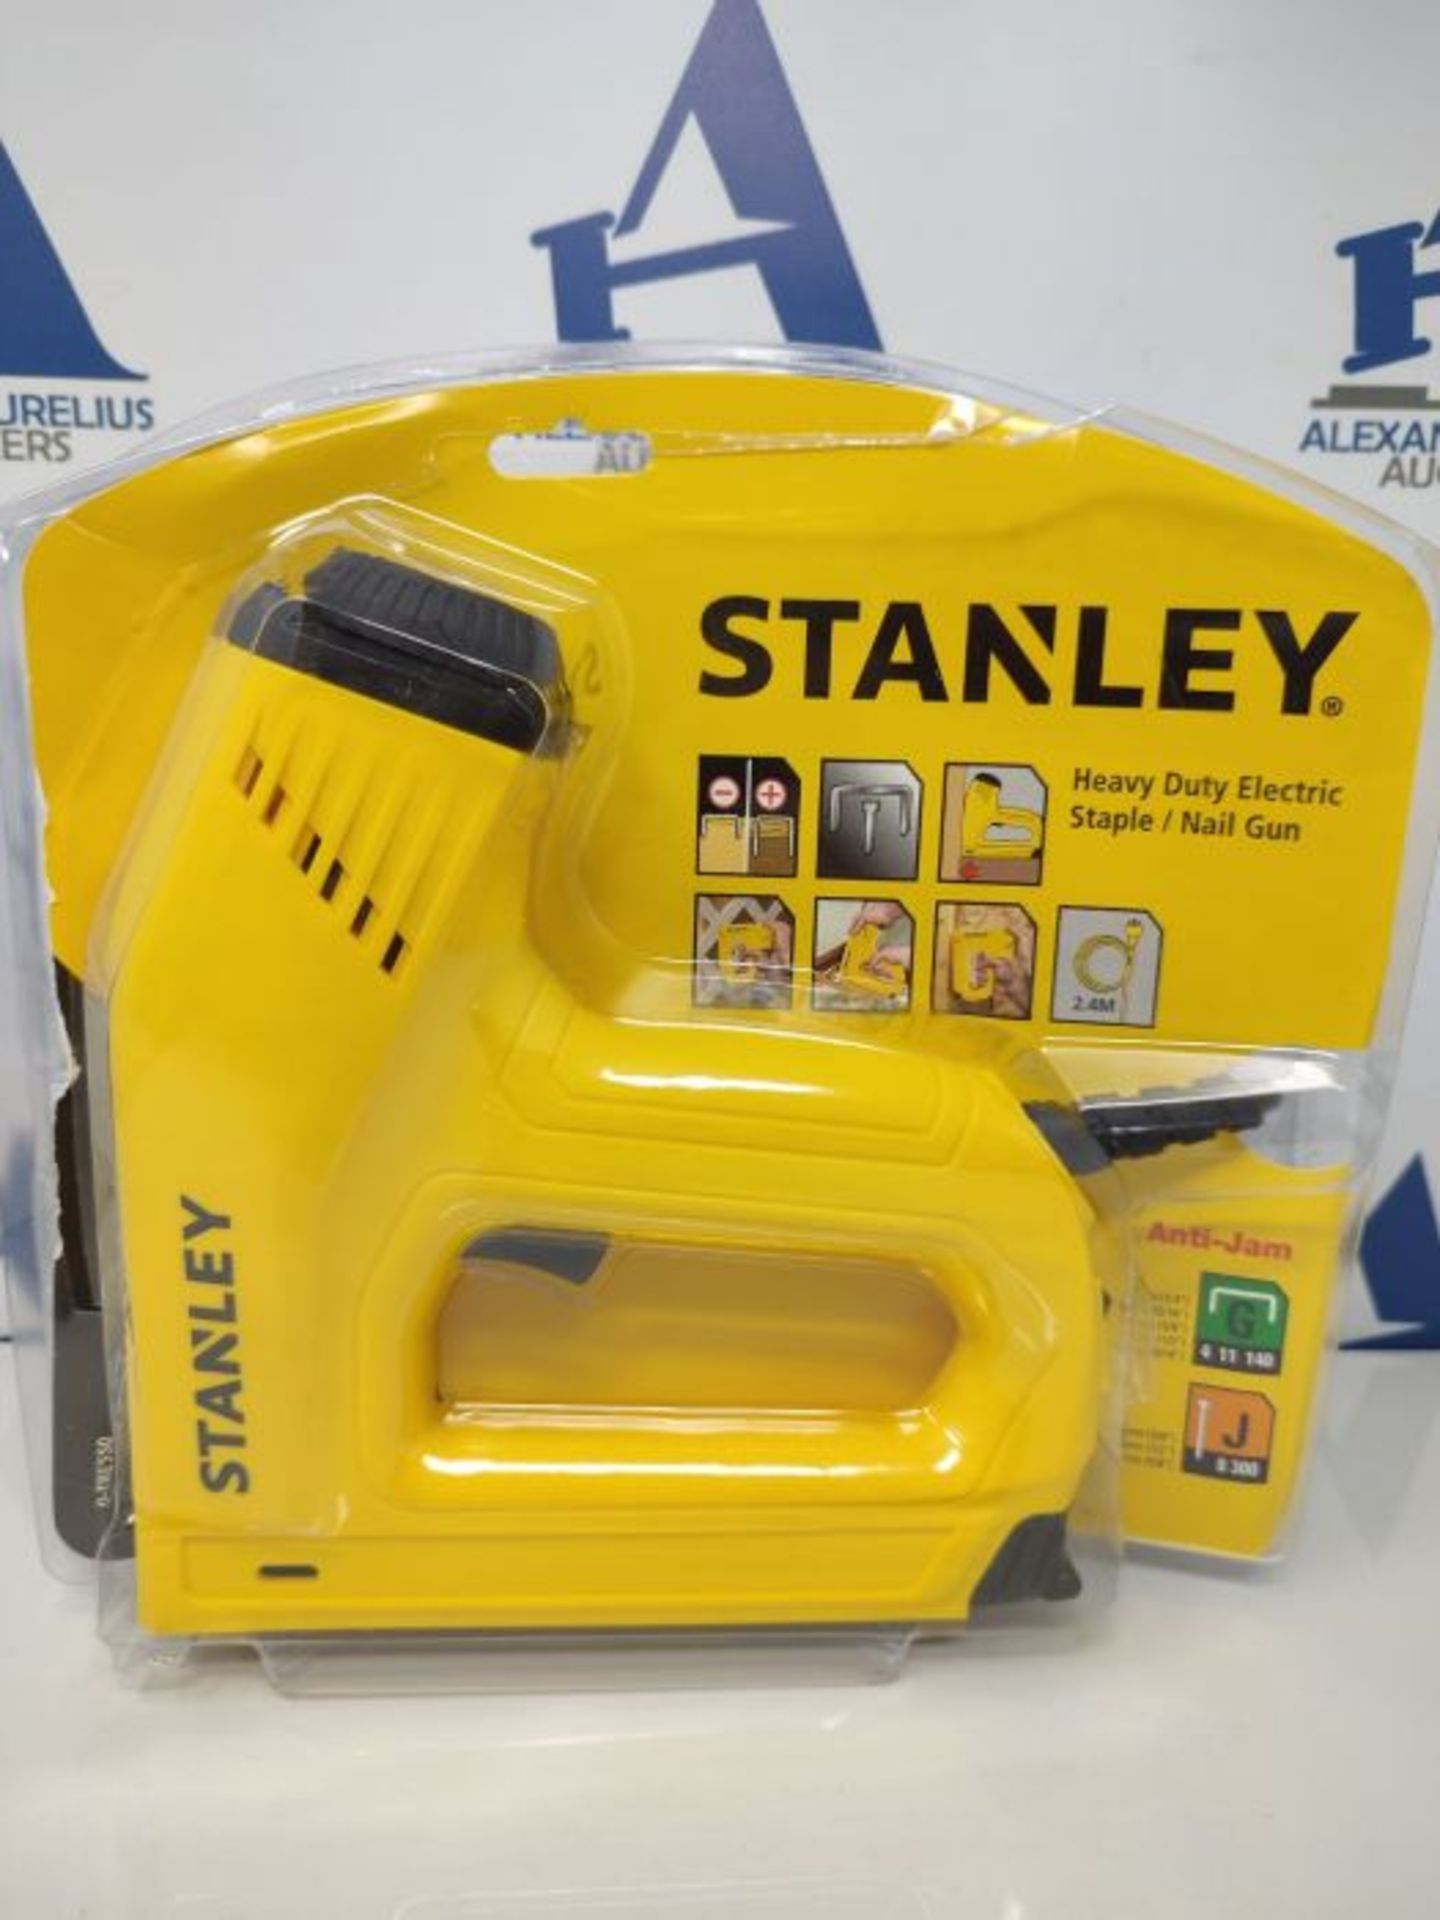 Stanley 0-TRE550 Heavy Duty Electric Staple/Nail Gun, YELLOW - Image 2 of 3